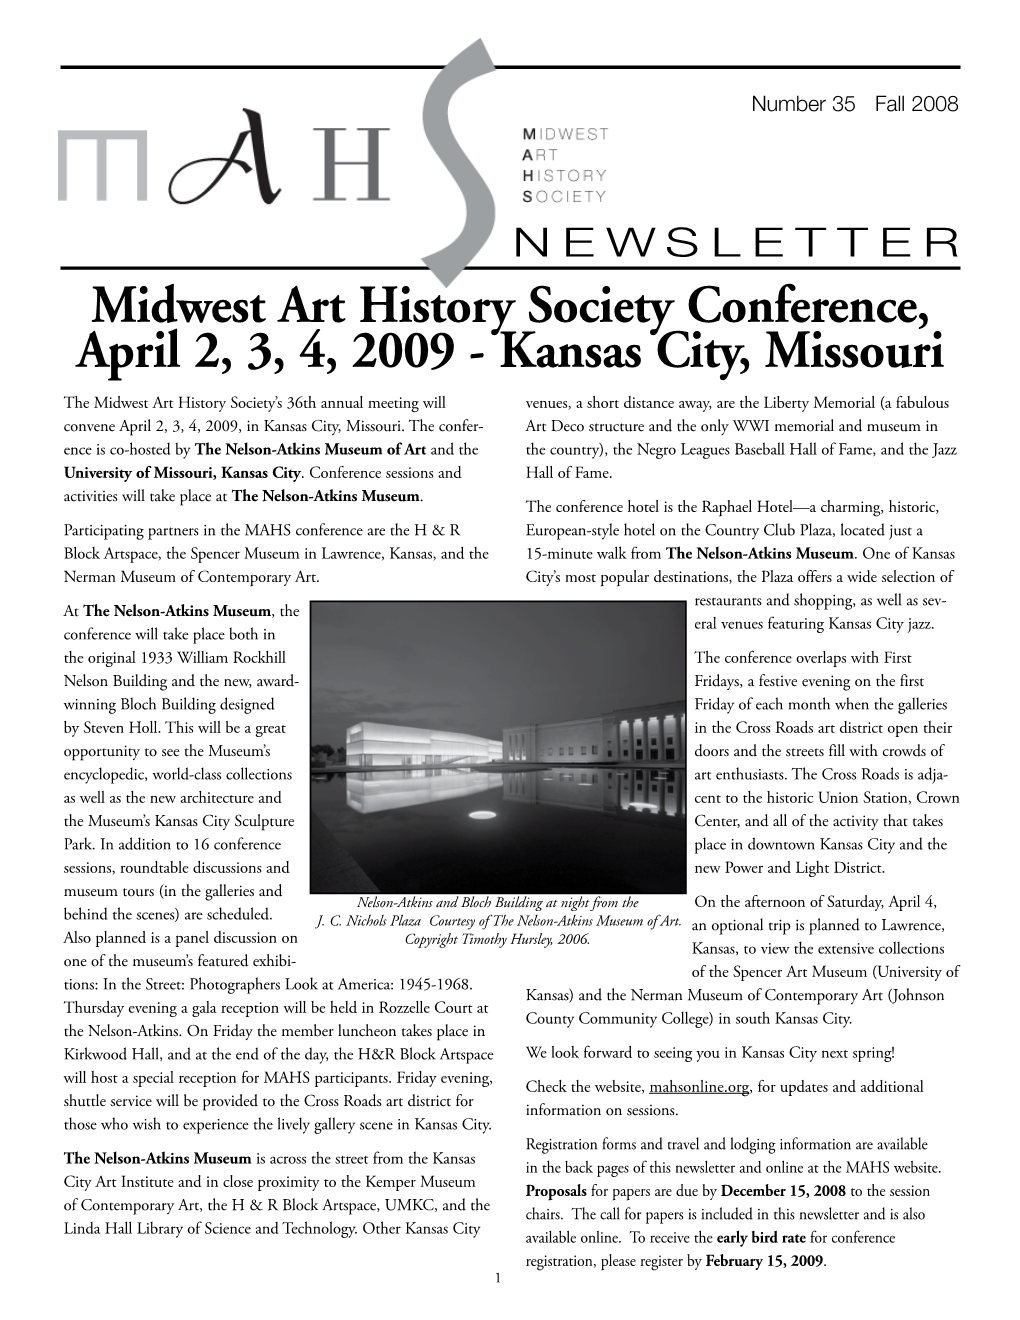 Midwest Art History Society Conference, April 2, 3, 4, 2009